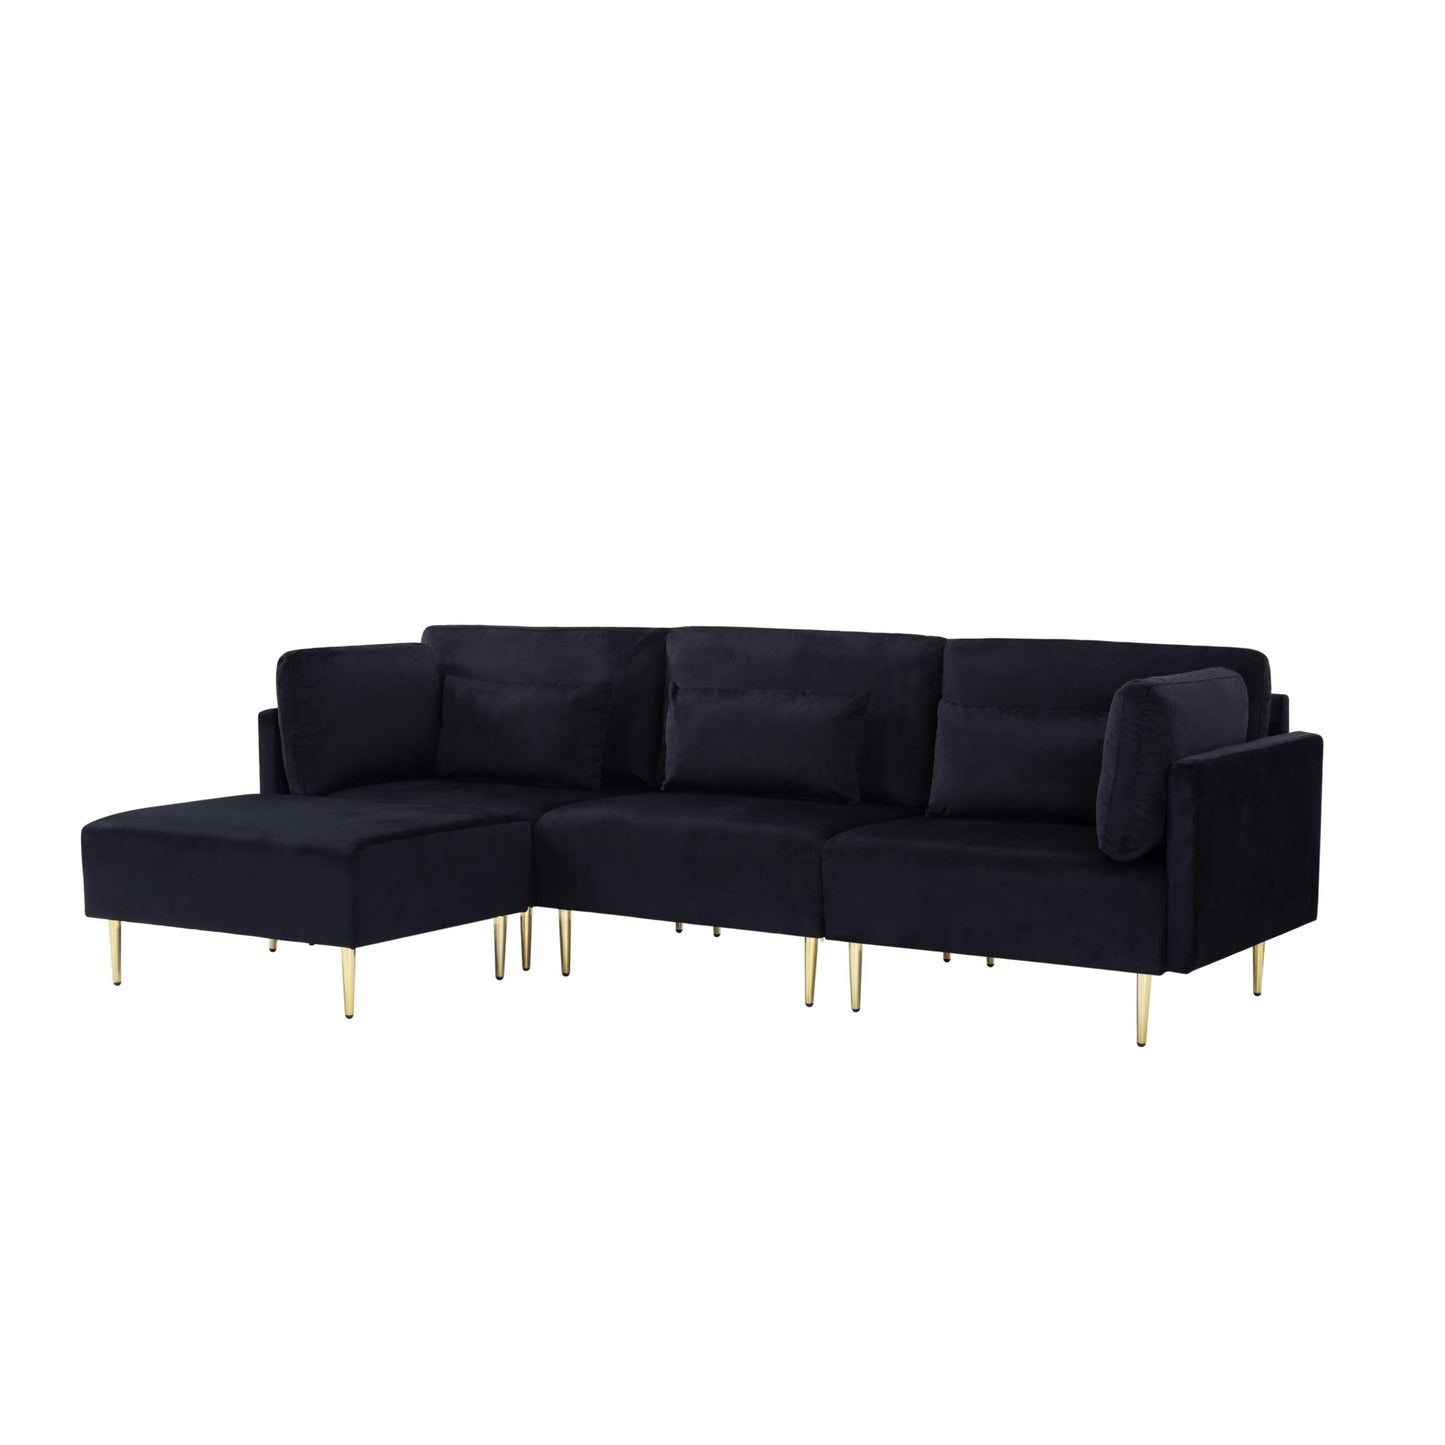 MetroLuxe Sectional with Ottoman